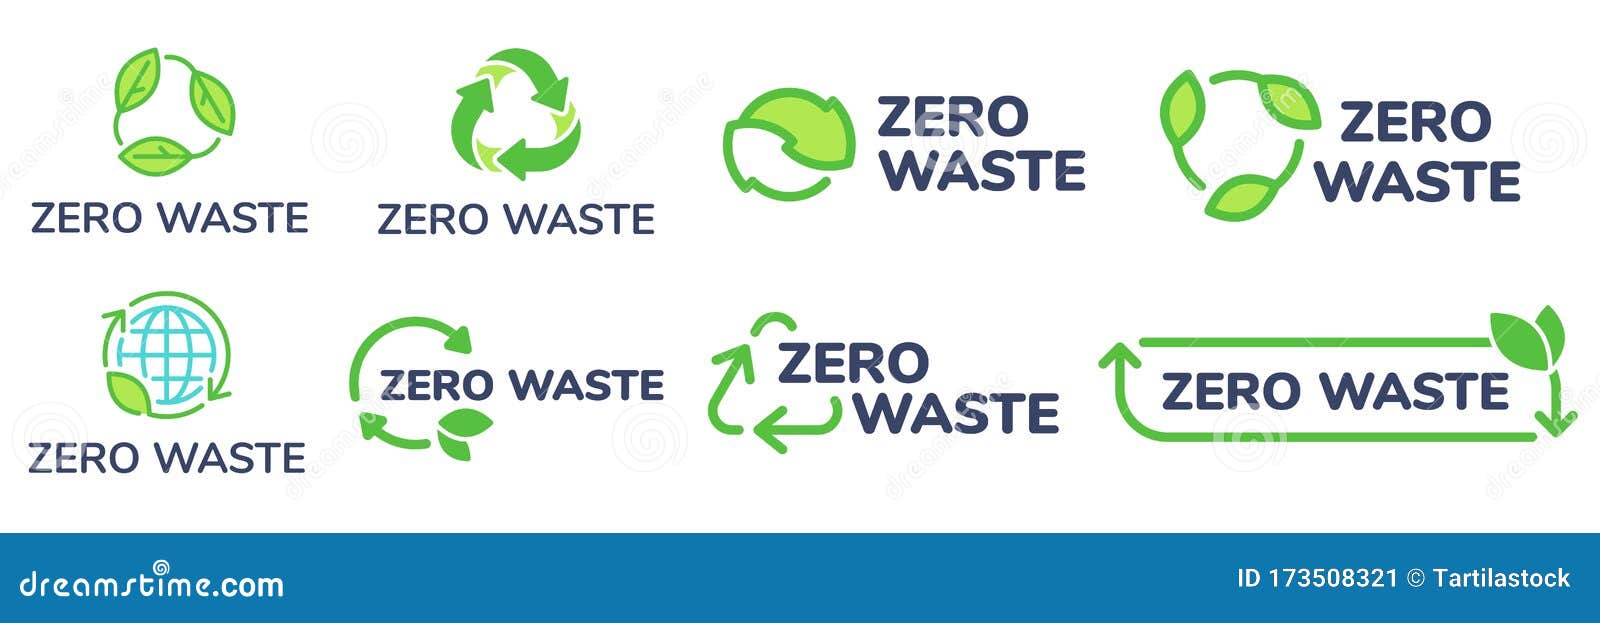 zero waste labels. green eco friendly label, reduce wastes and recycle icon with plant leaves  set